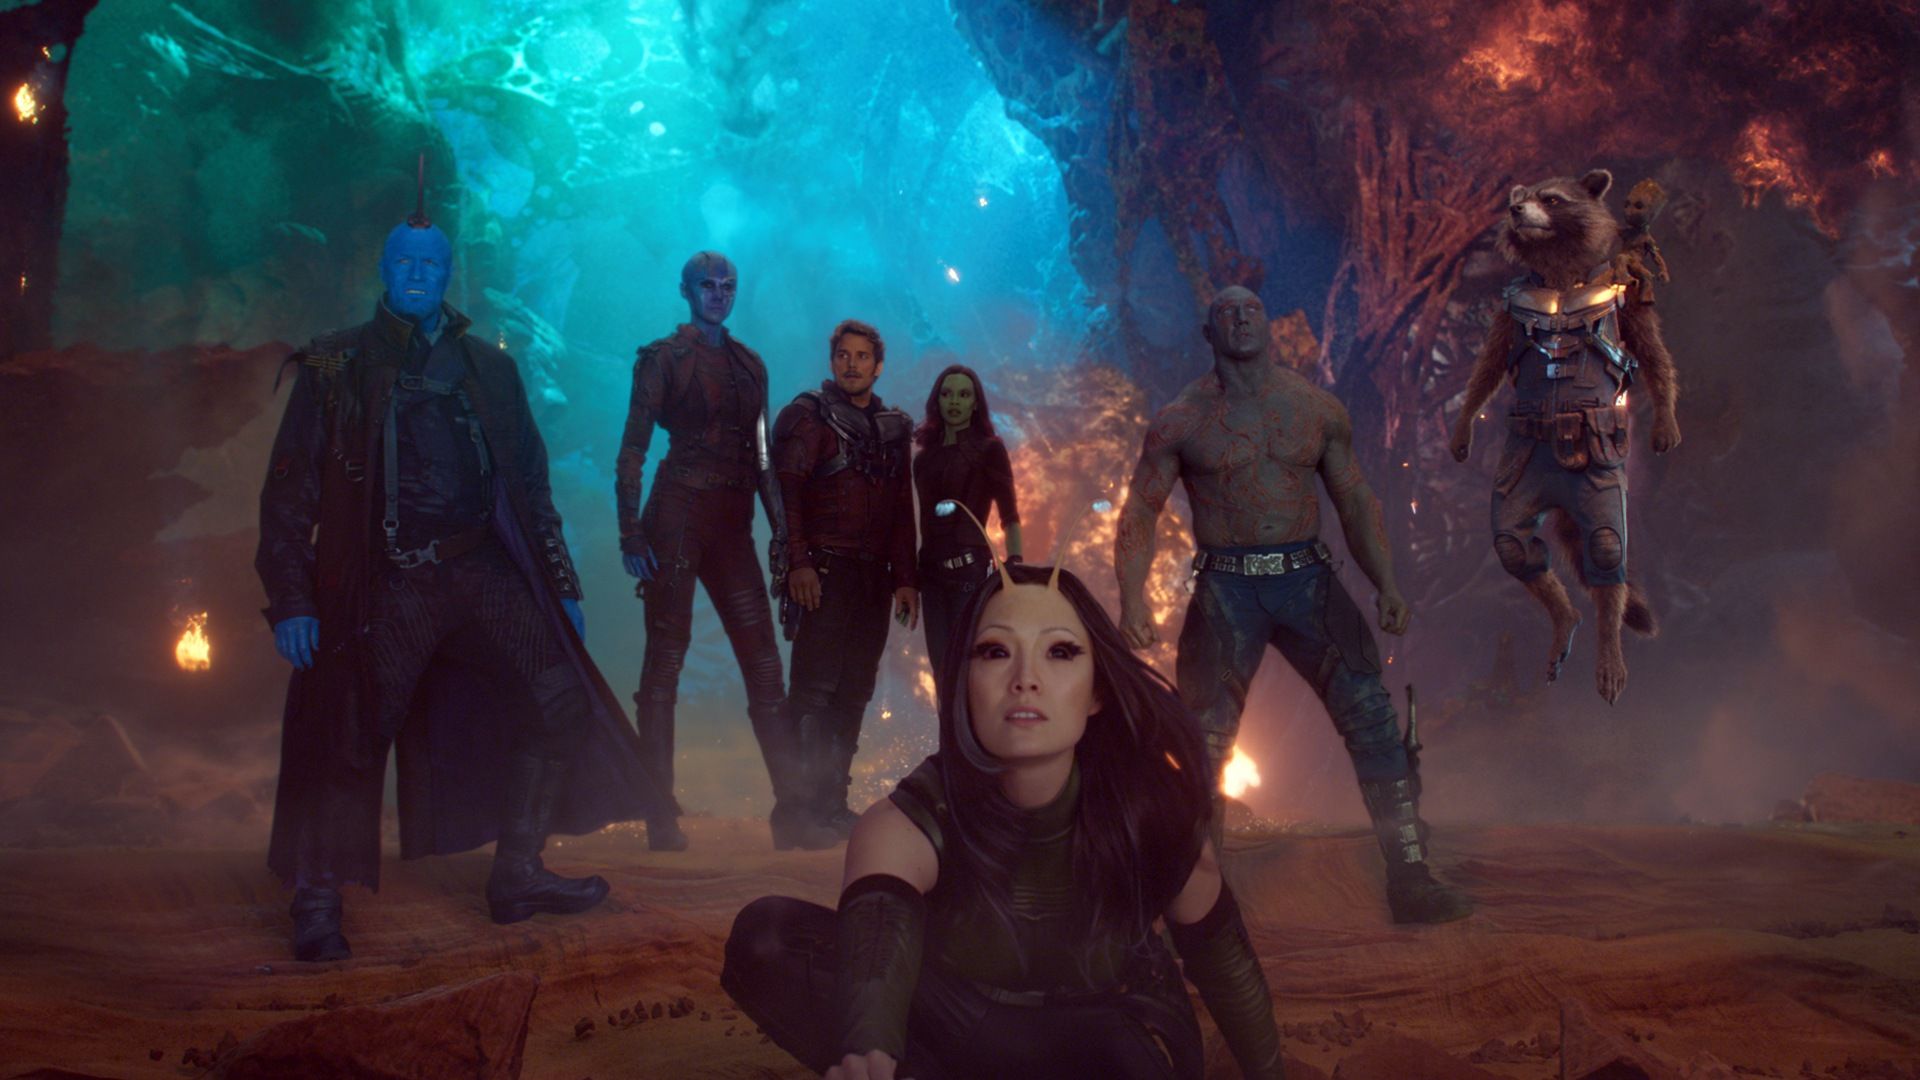 Guardians of the Galaxy Character Wallpaper